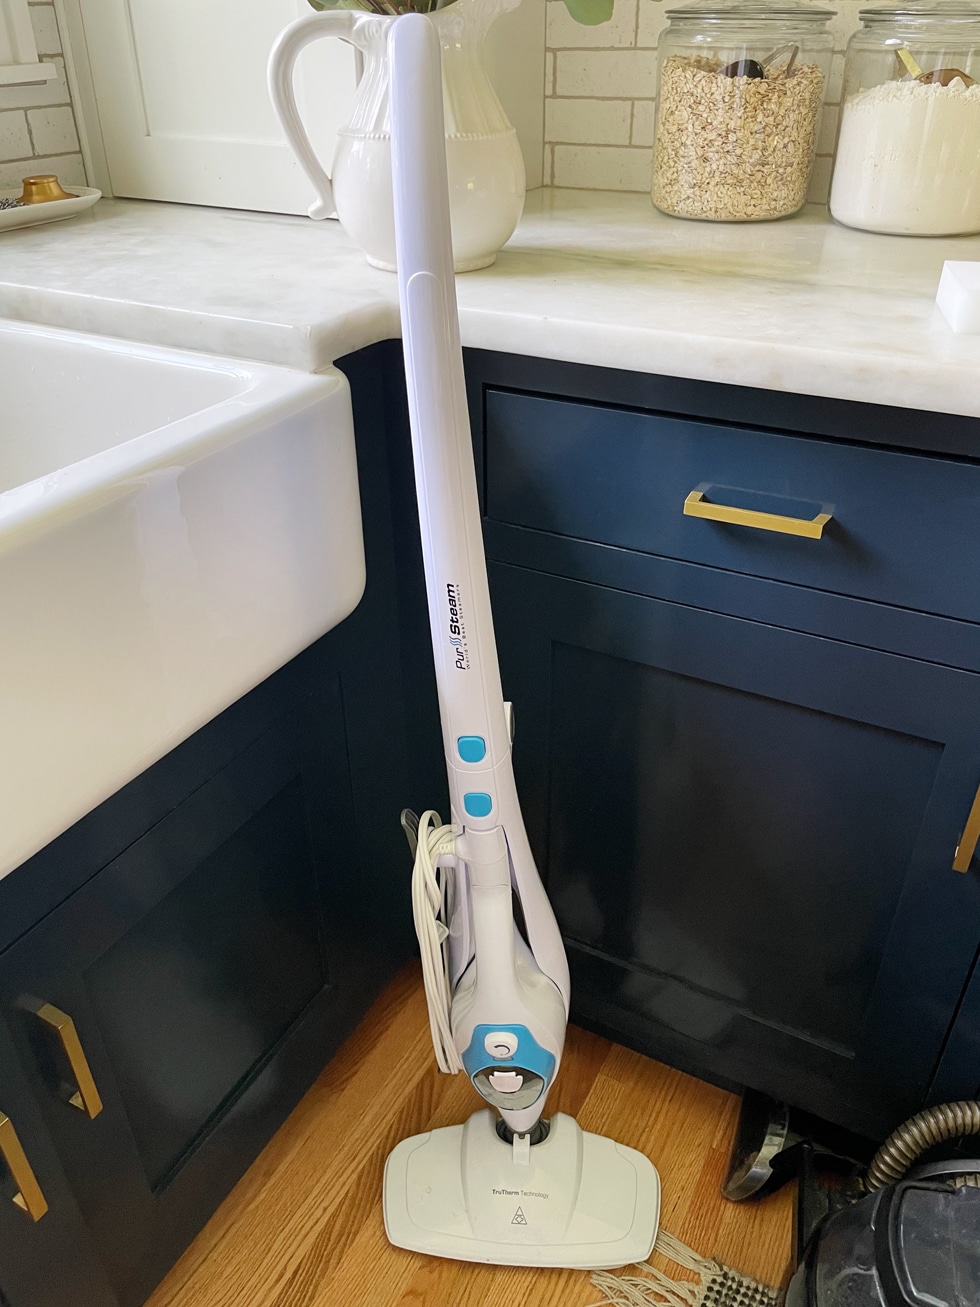 My 10 Favorite Cleaning Tools, Gadgets and Hacks That Make Life Easier! -  The Inspired Room